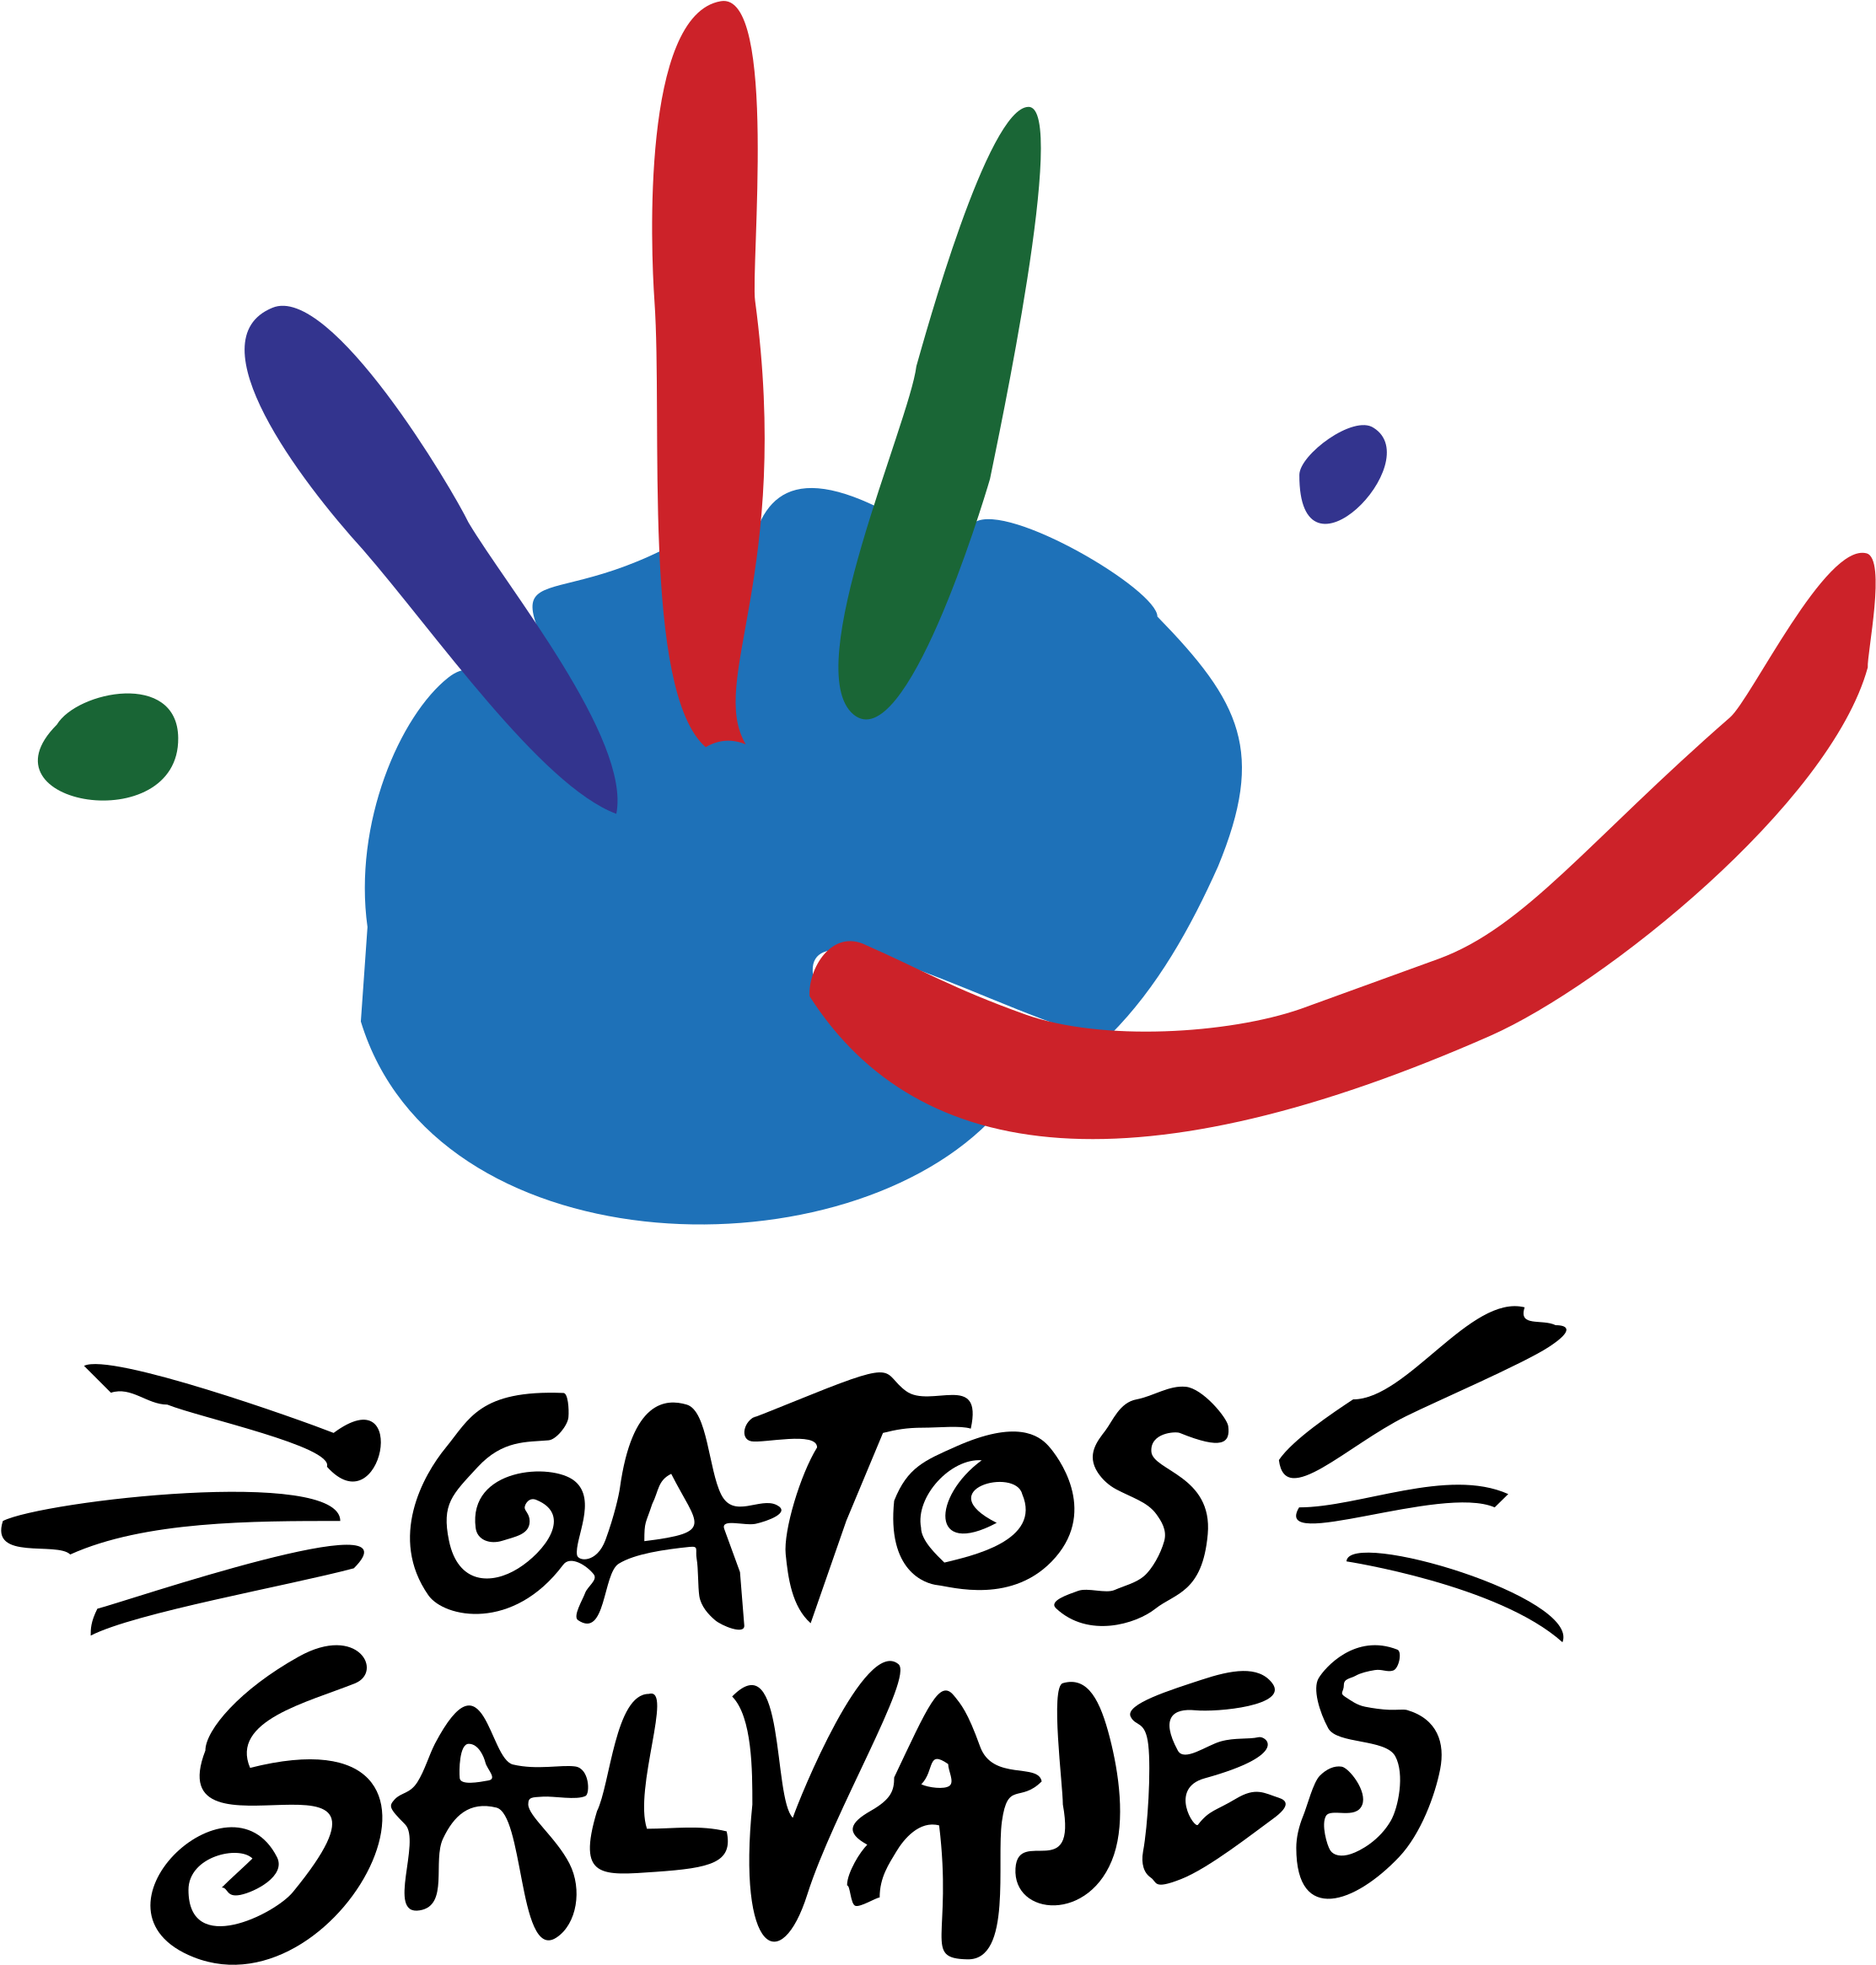 A Colorful Drawing Of A Blue Circle With Red And Green Lines